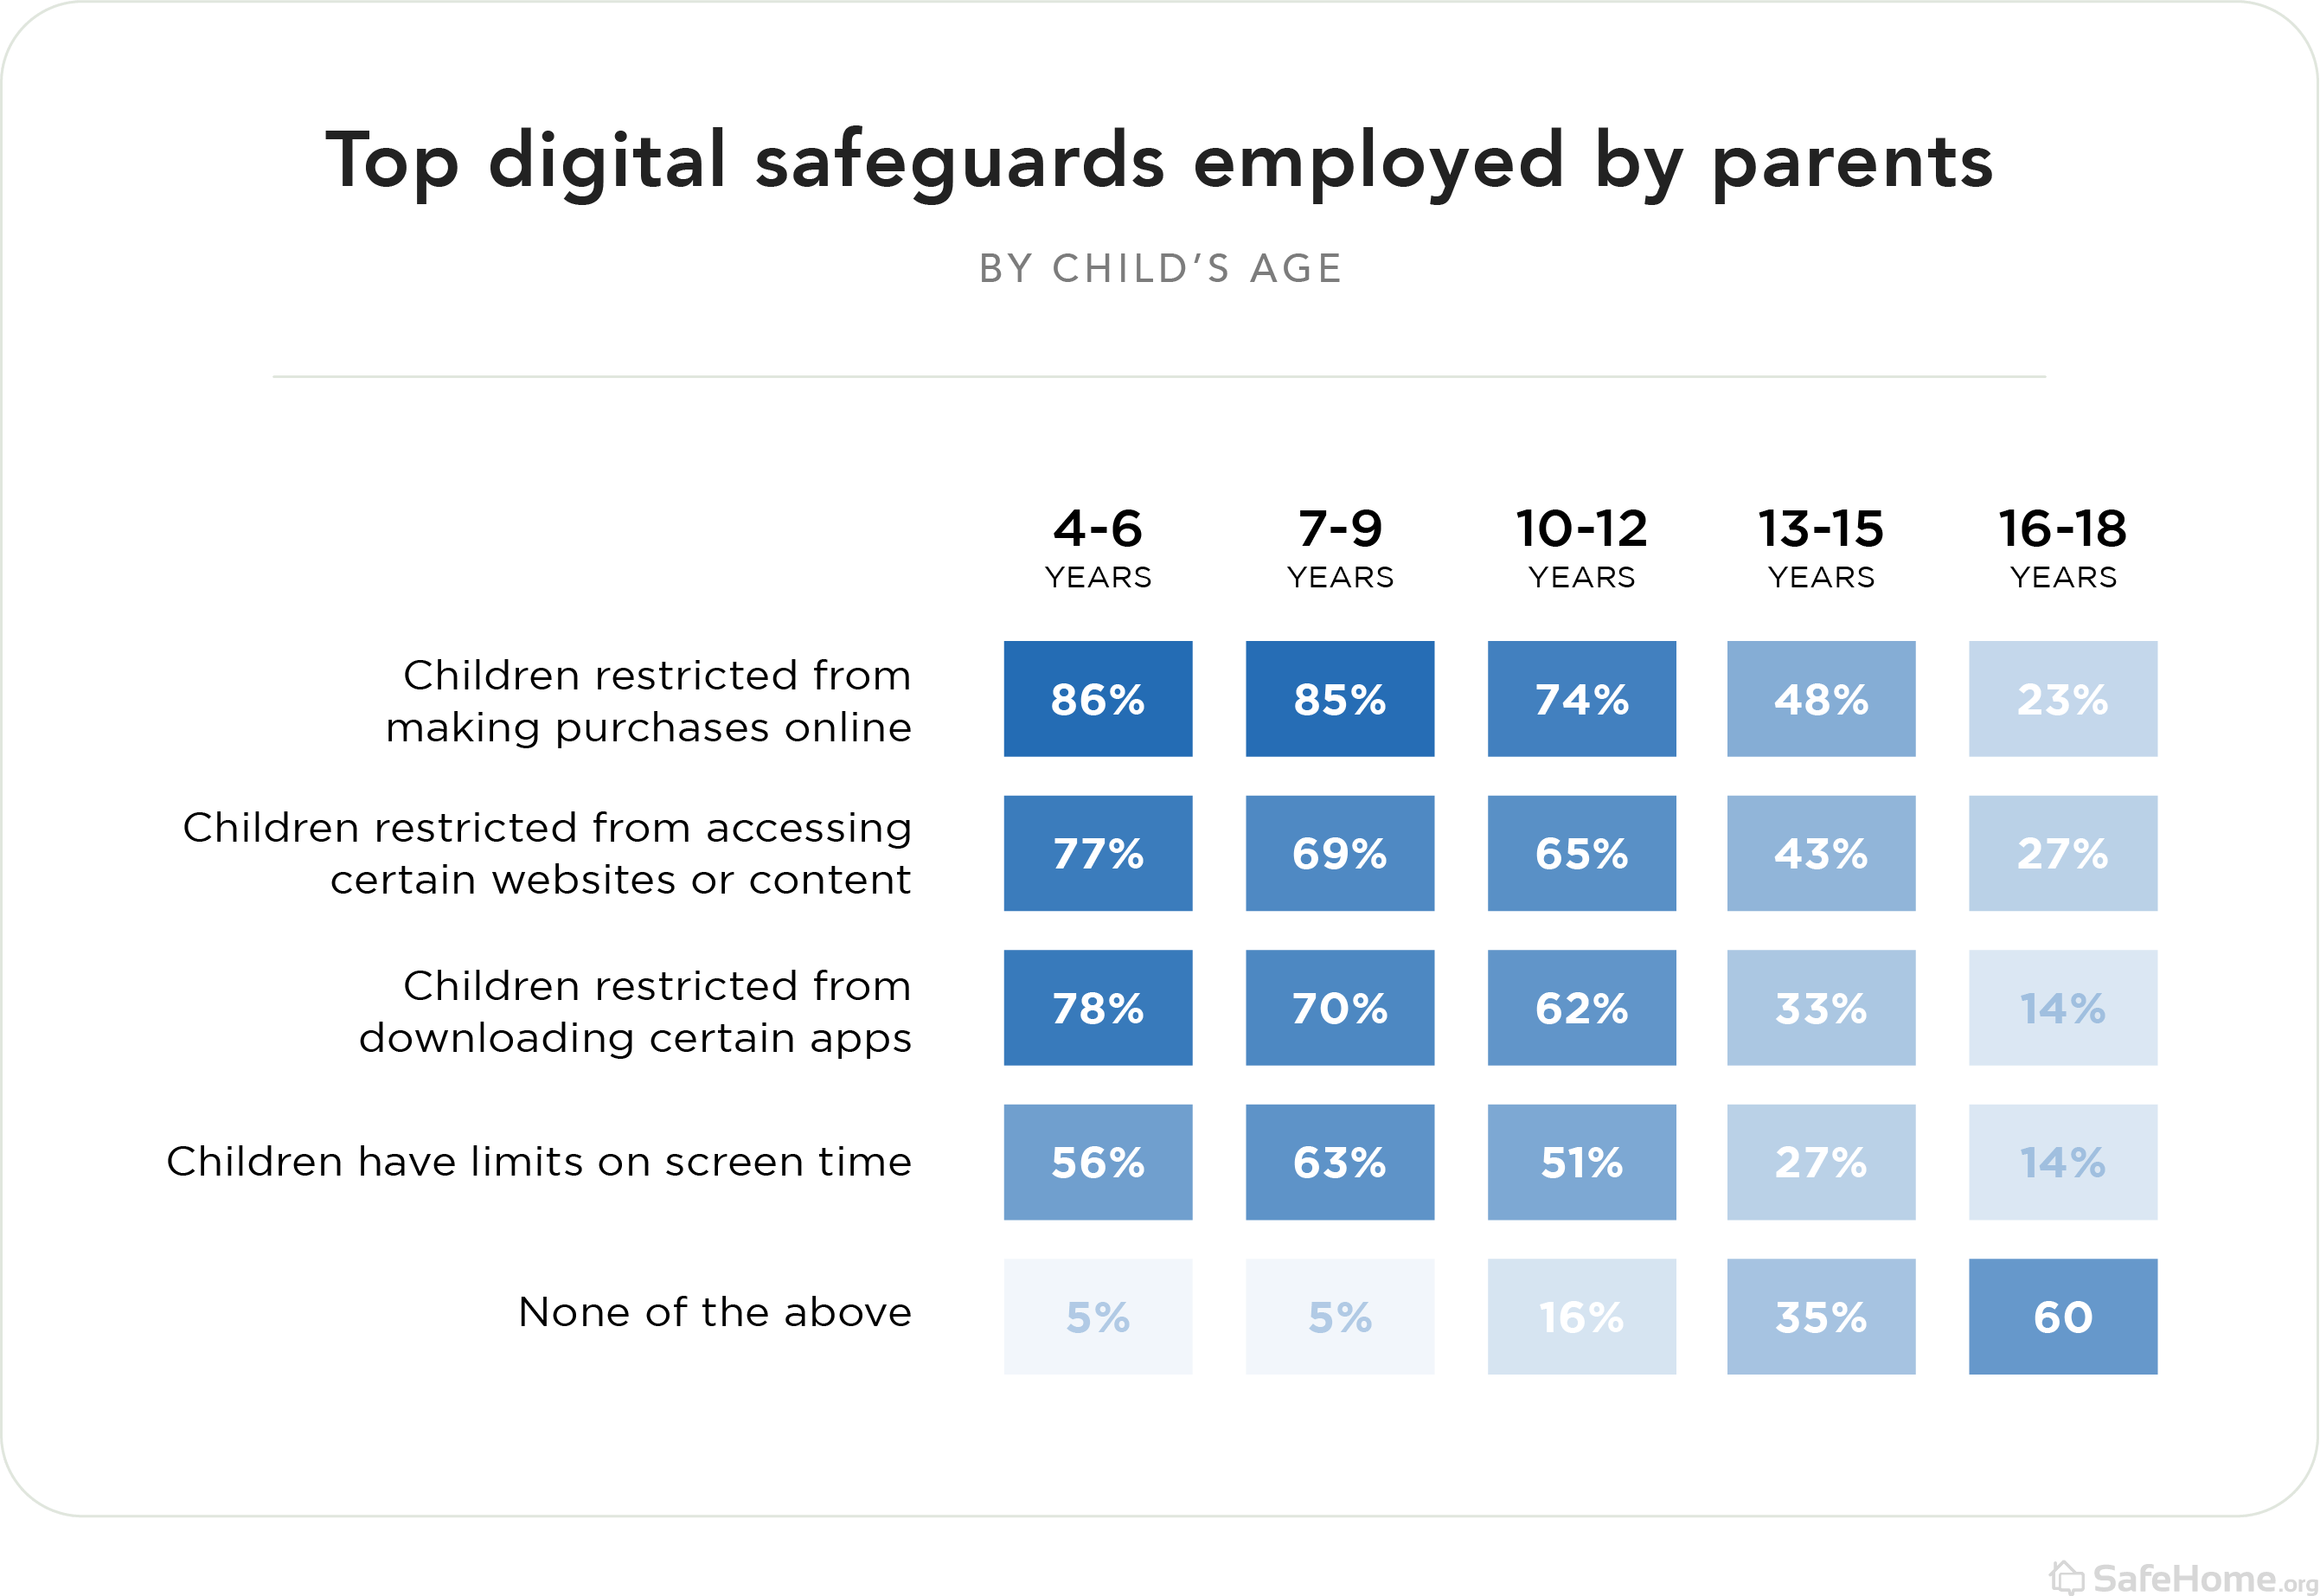 Top digital safeguards employed by parents